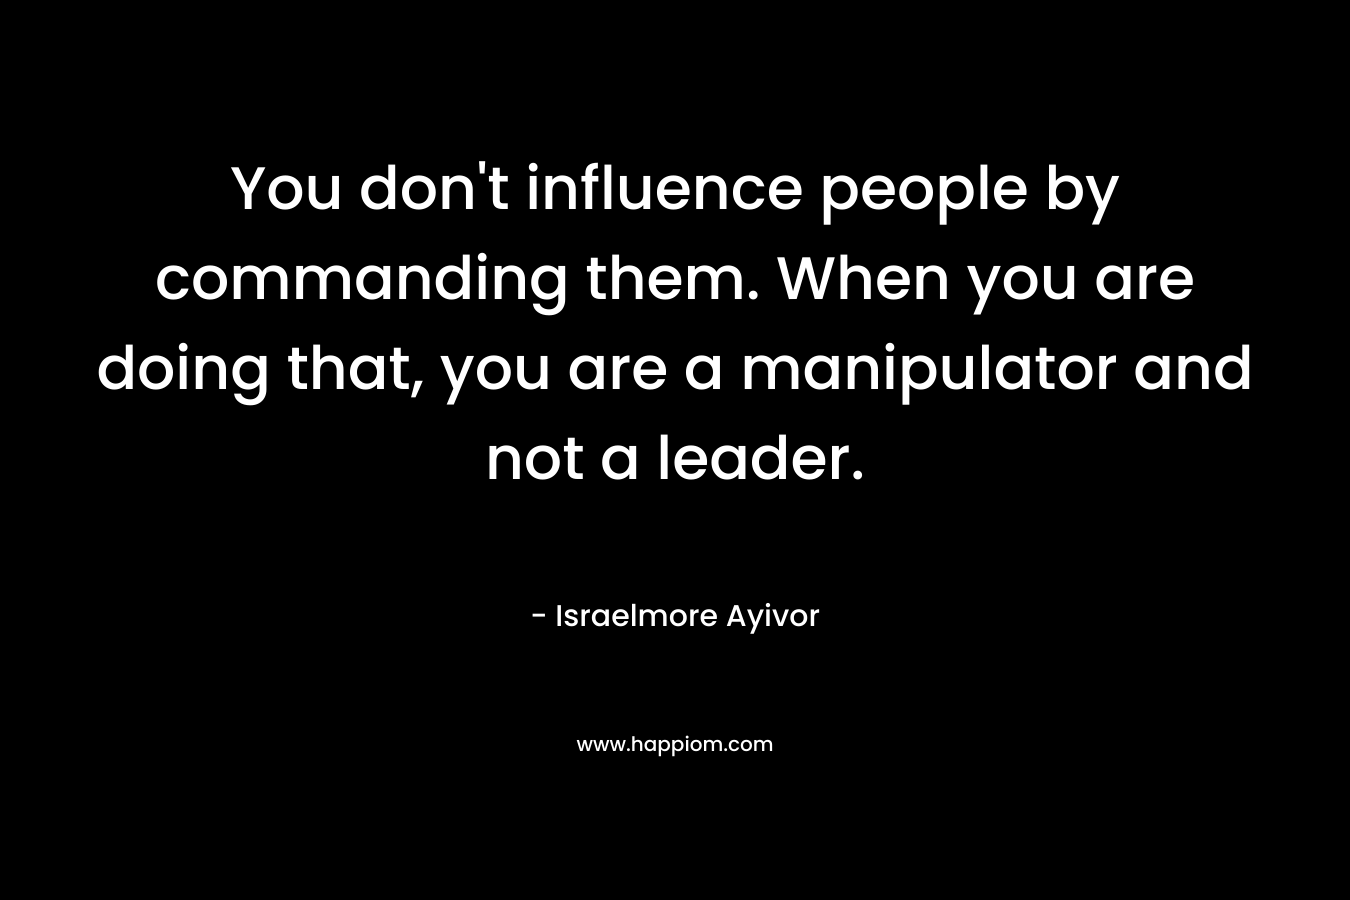 You don’t influence people by commanding them. When you are doing that, you are a manipulator and not a leader. – Israelmore Ayivor